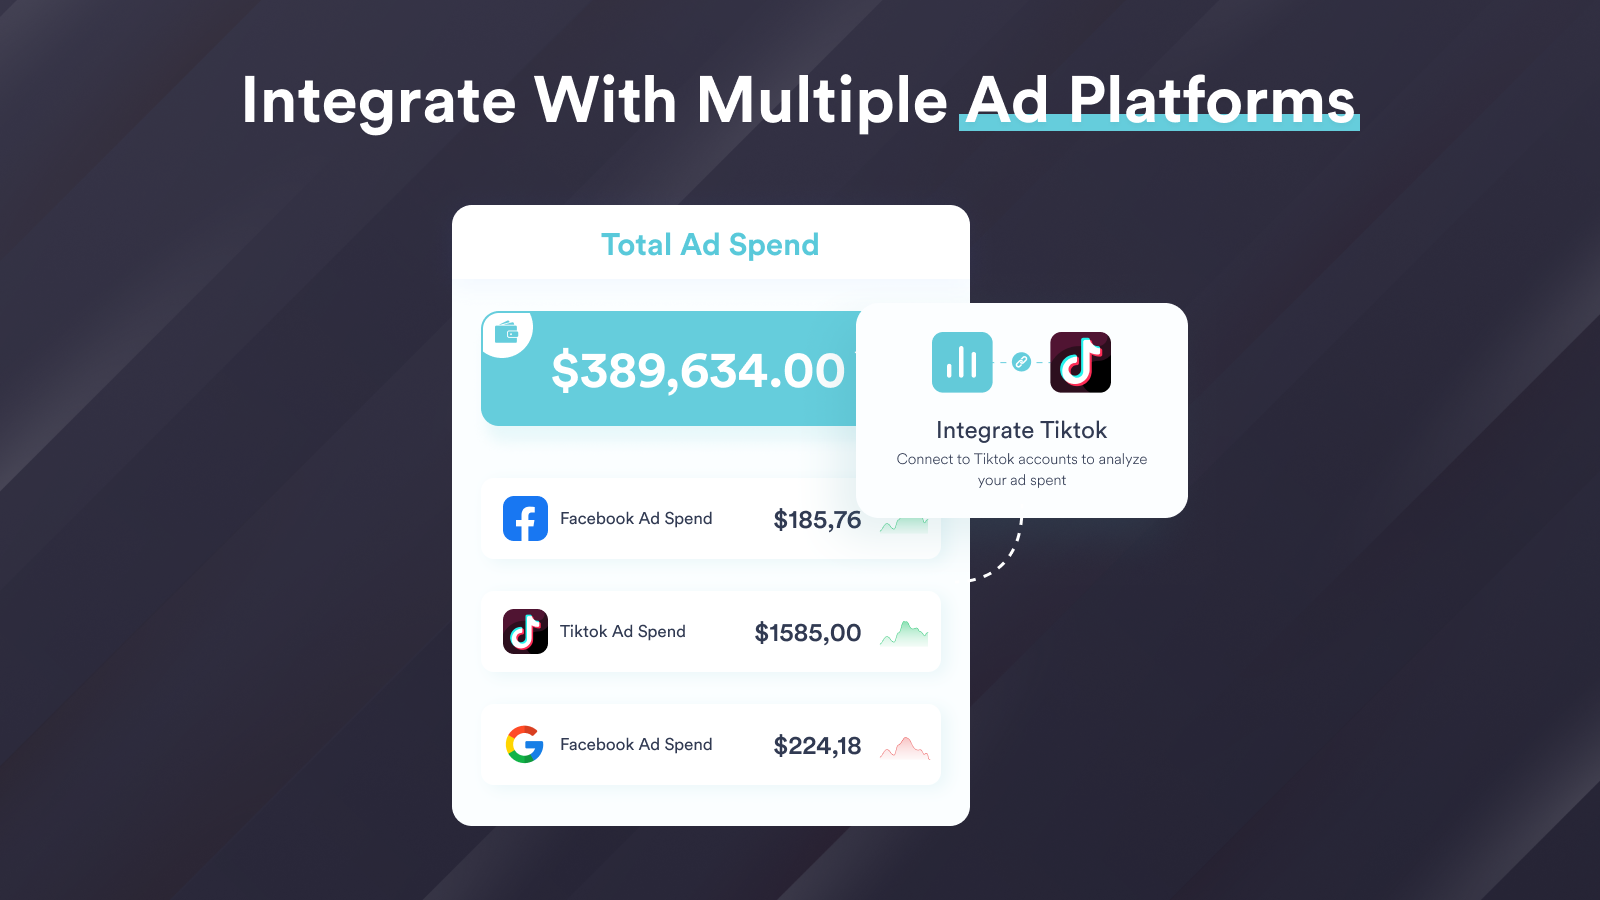 Integrate With Multiple Ad Platforms